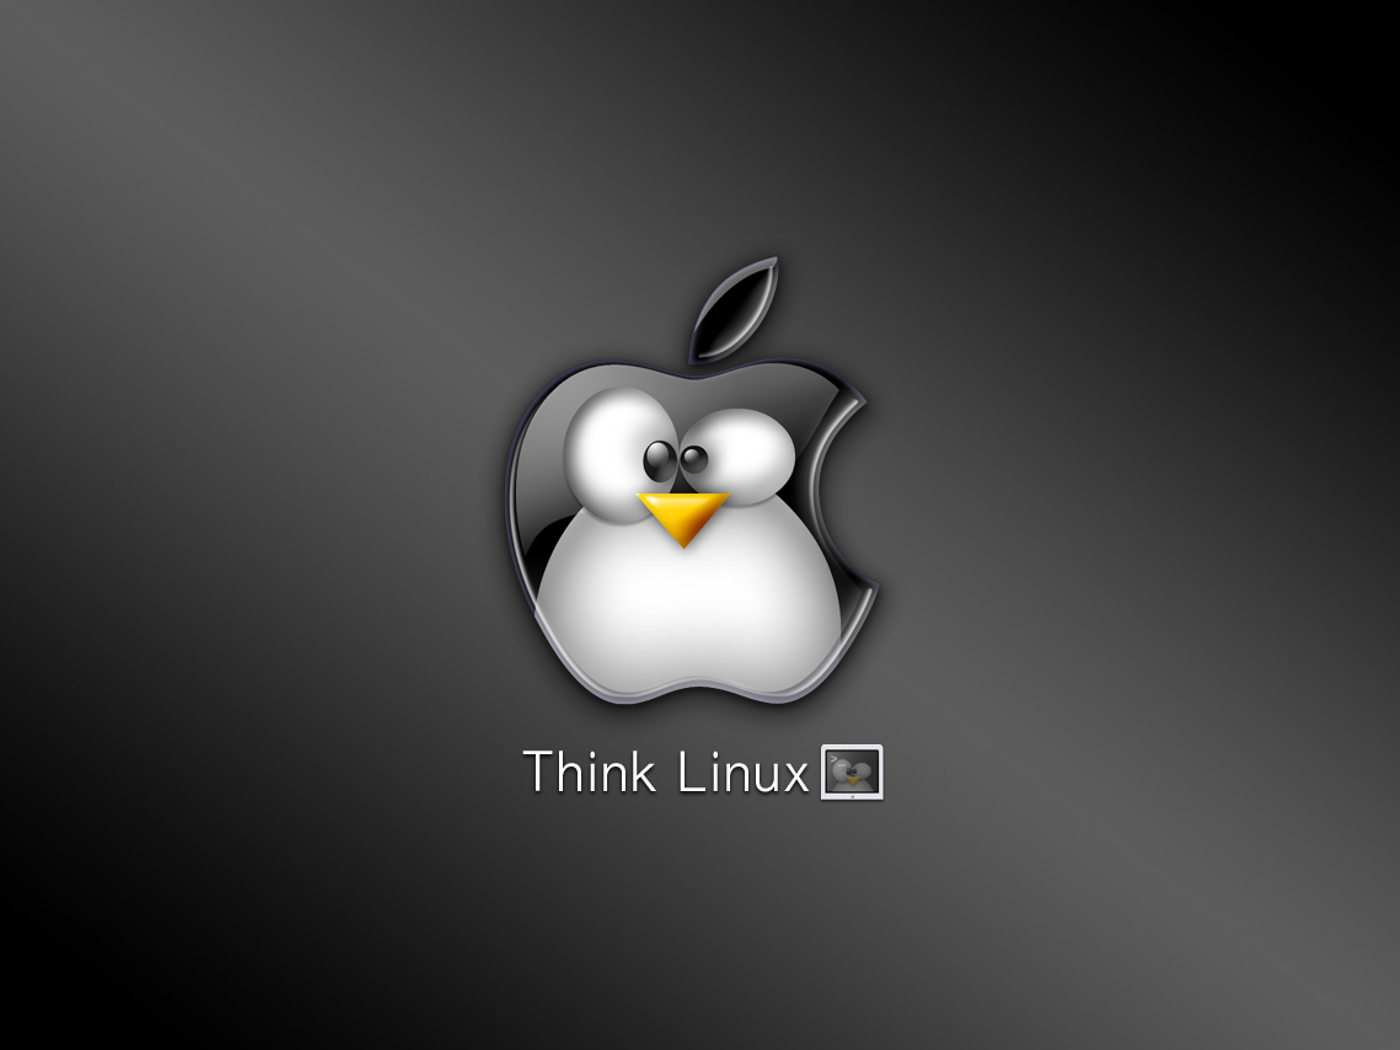 Funny Linux Wallpapers on Linux Computer Os Operating System Funny Penguin Hd Wallpaper